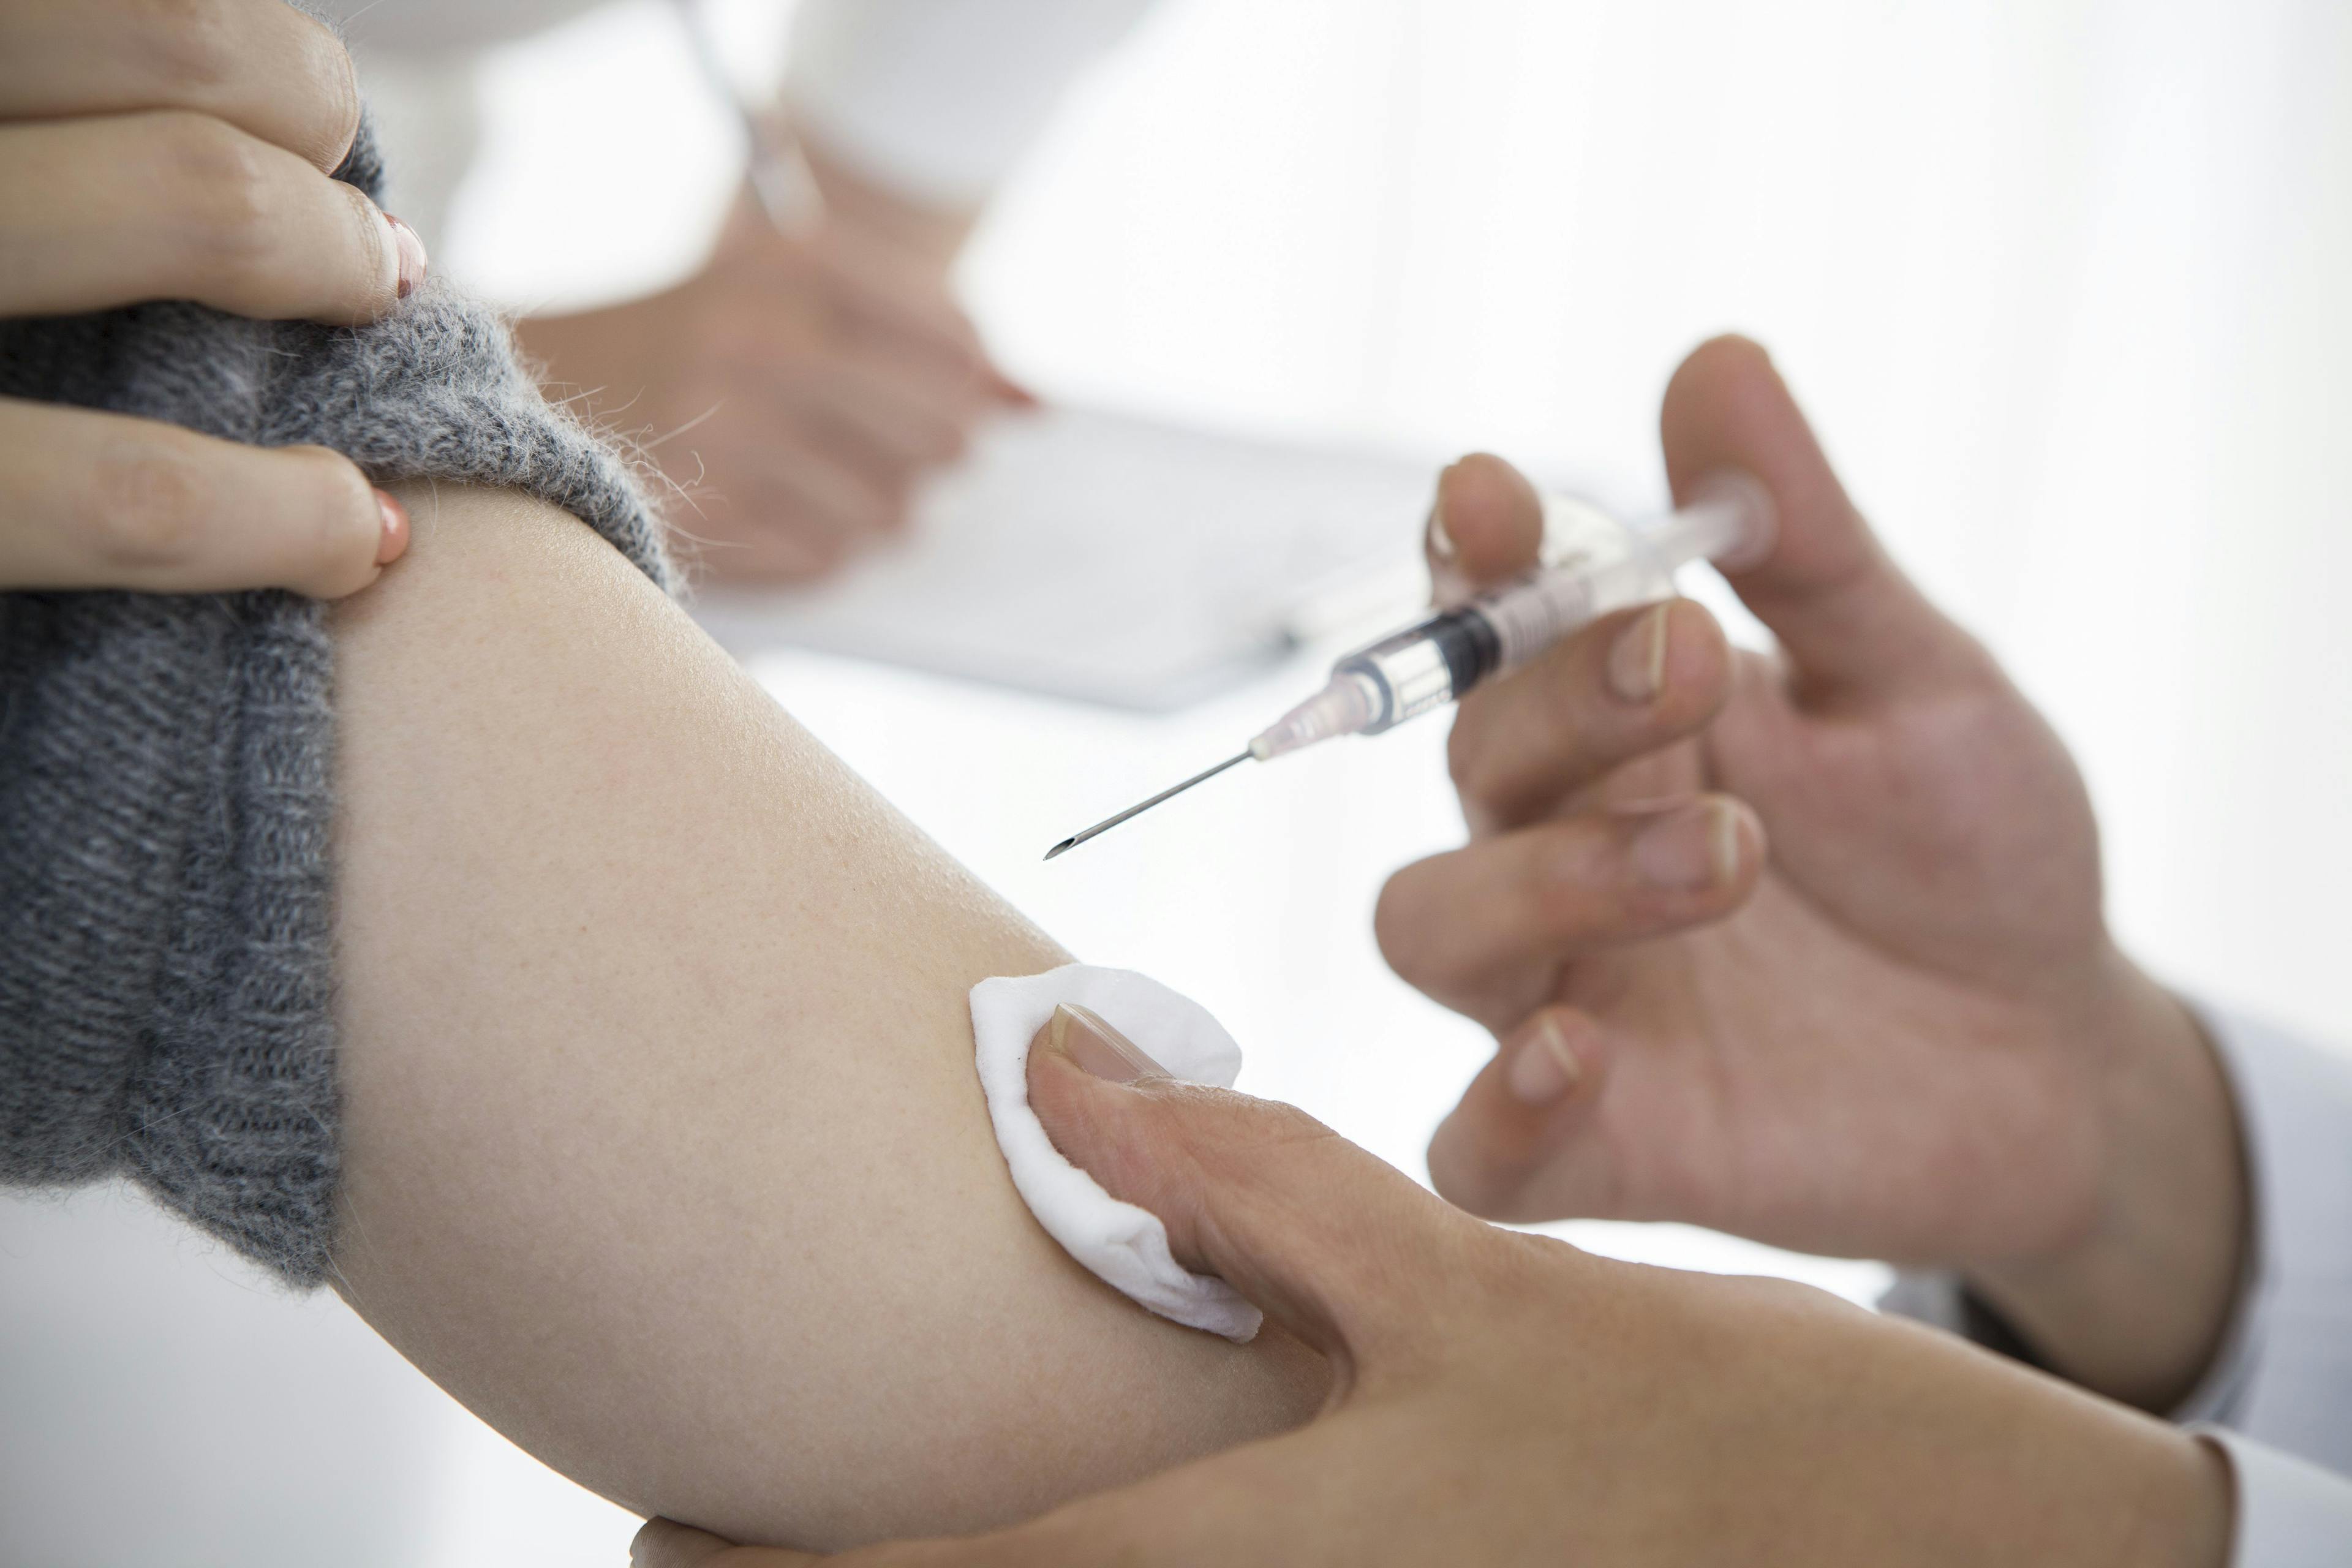 Thinking About Getting a COVID-19 Vaccine? CDC Weighs In